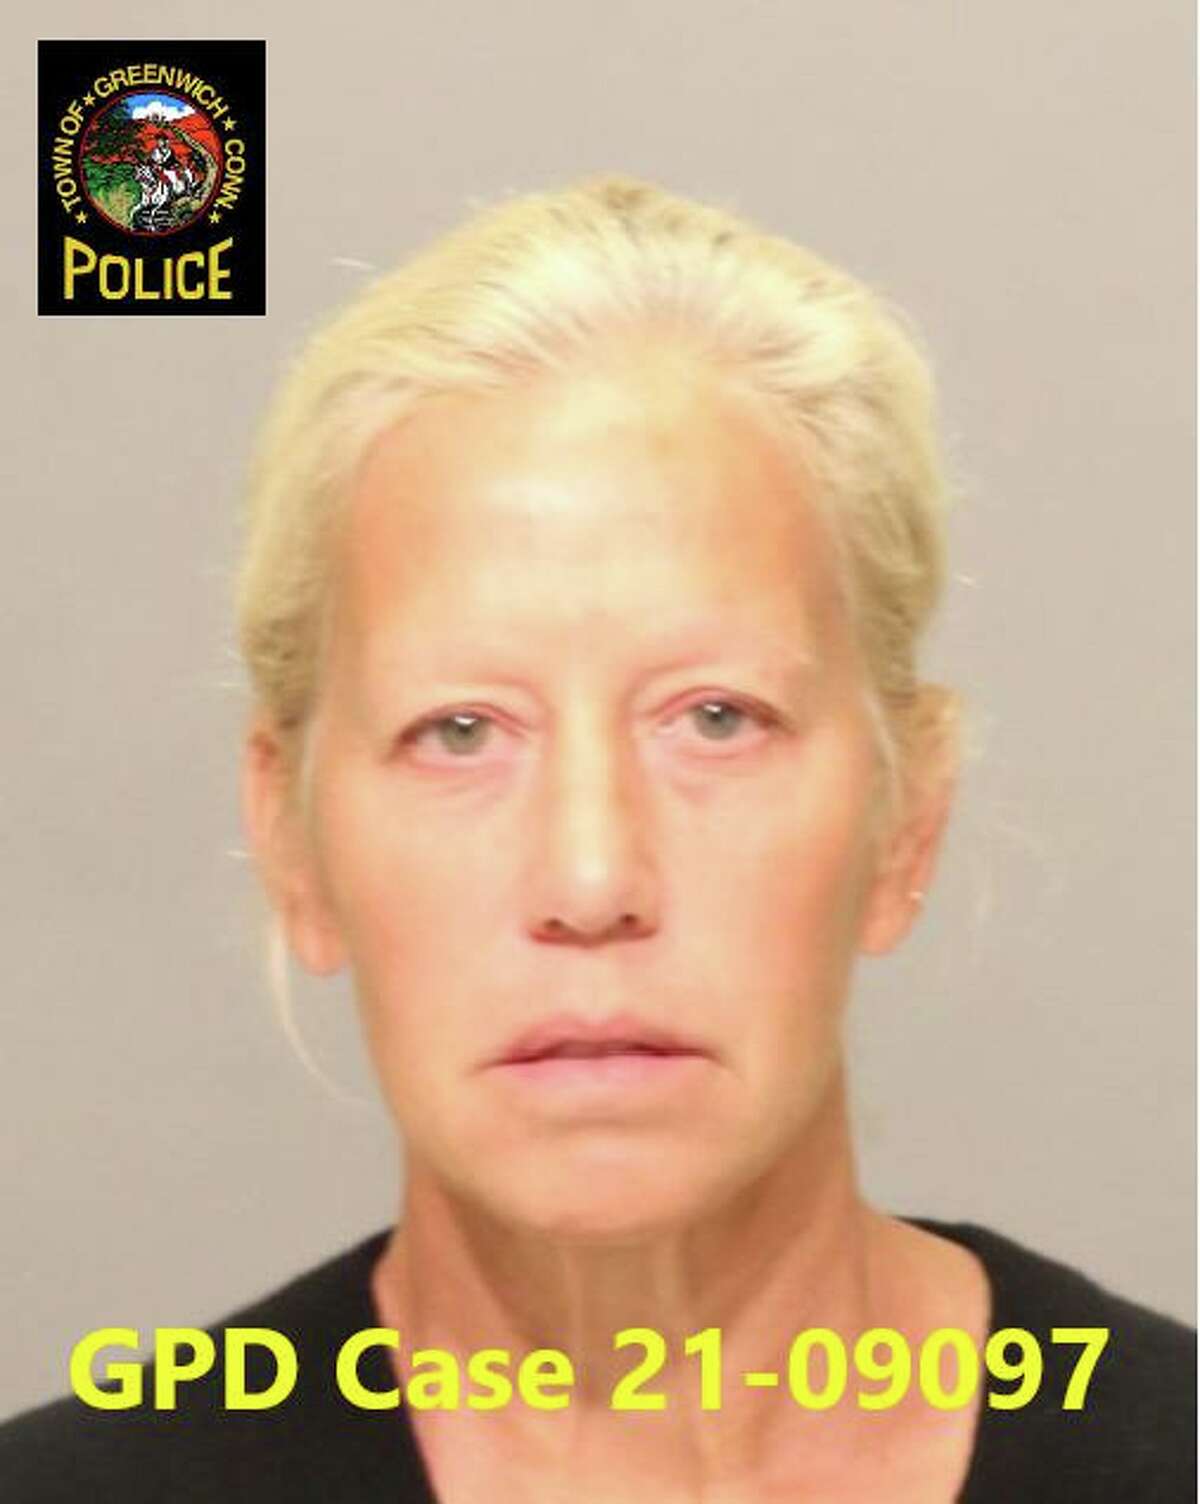 Hadley Palmer pleaded guilty Jan. 19 in state Superior Court in Stamford to three counts of voyeurism and one count of risk of injury to a minor as a part of a plea deal with prosecutors. Palmer, 53, was arrested by Greenwich police in October 2021 on an active warrant.